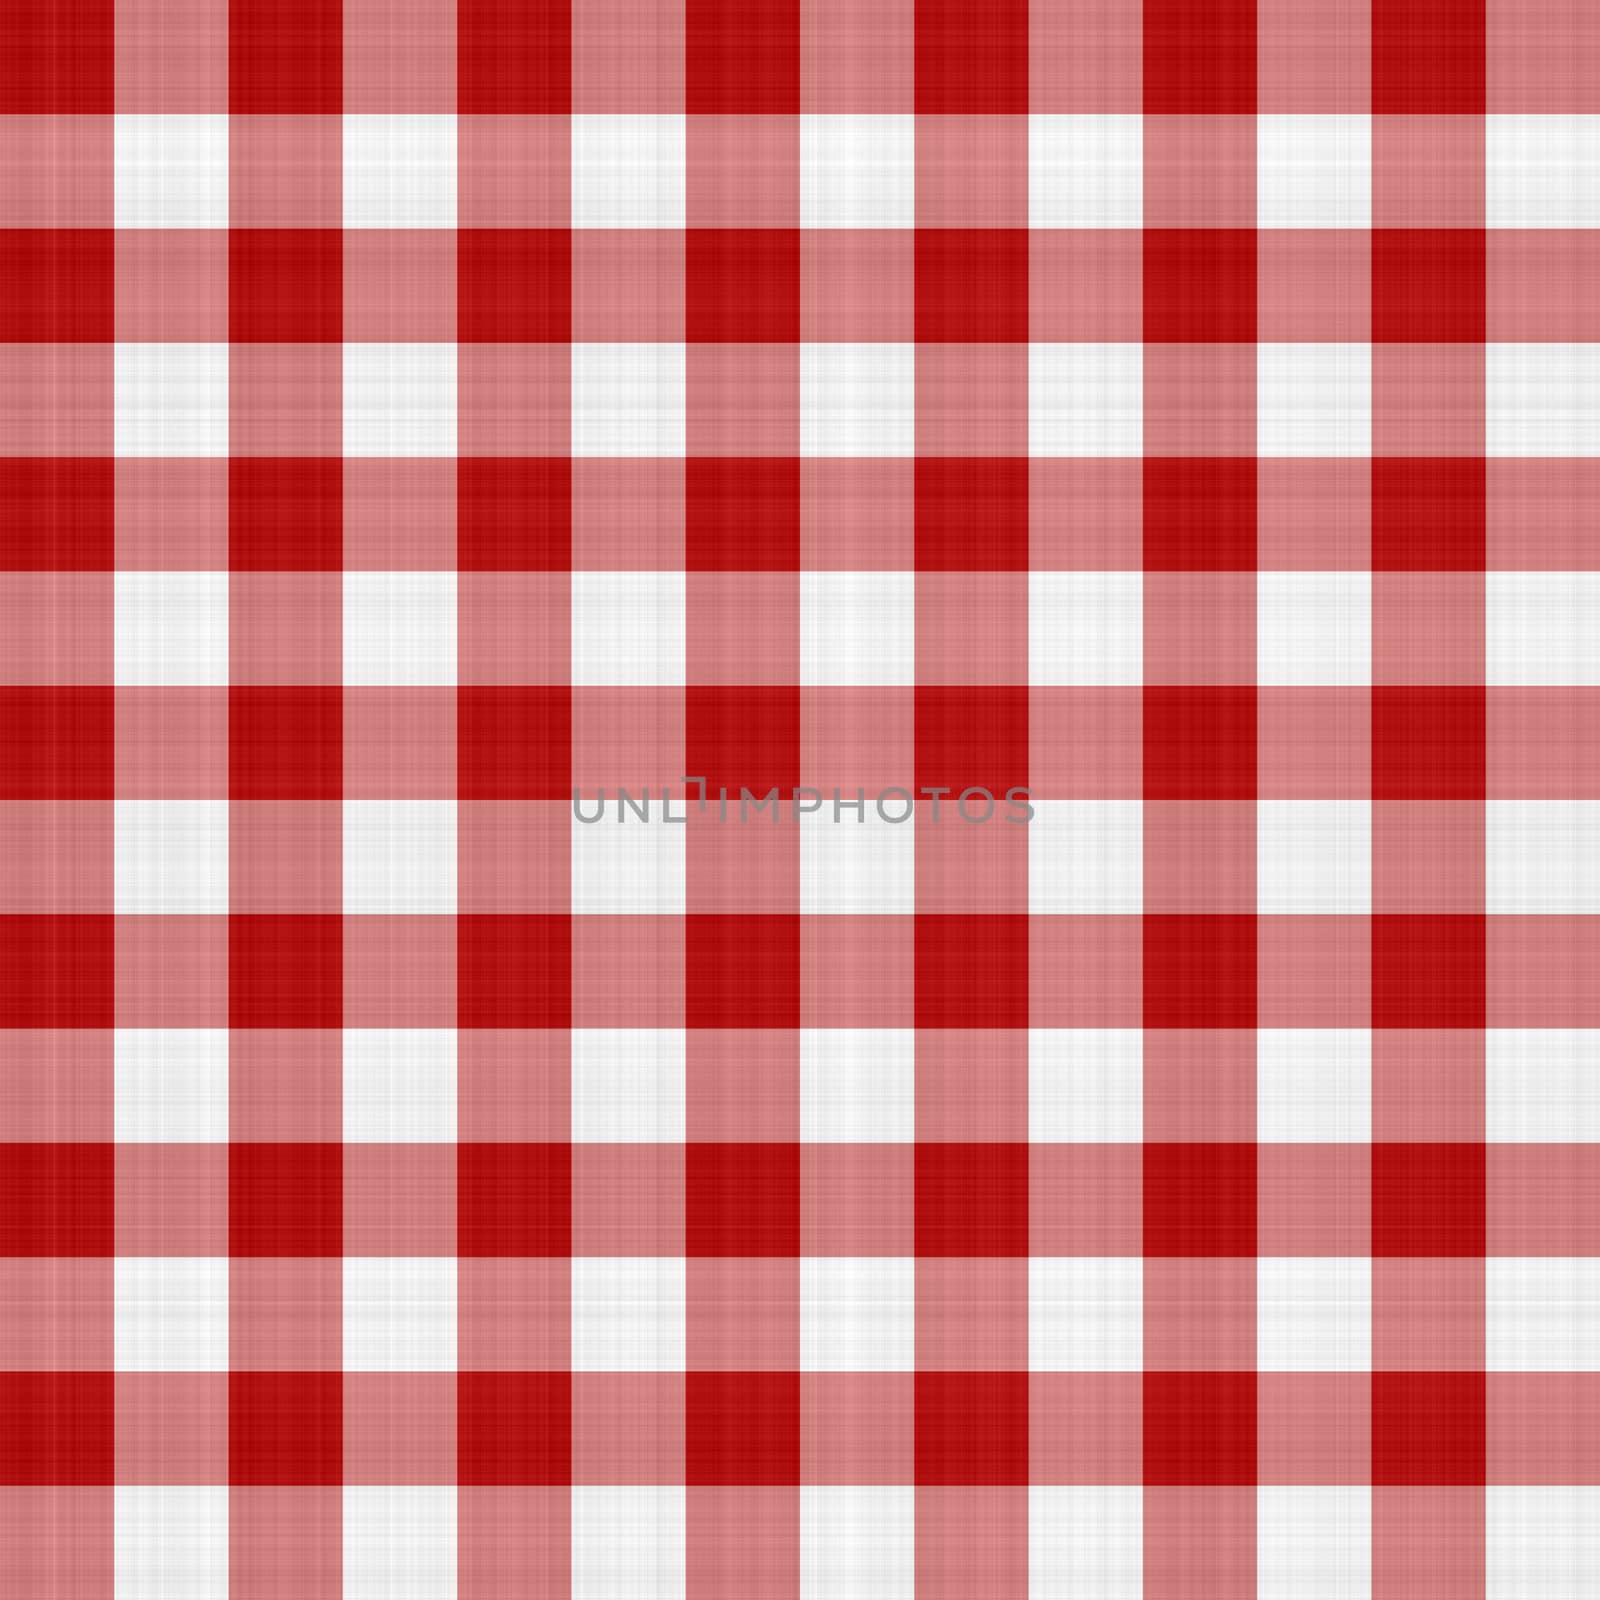 Red and White Picnic Tablecloth by graficallyminded